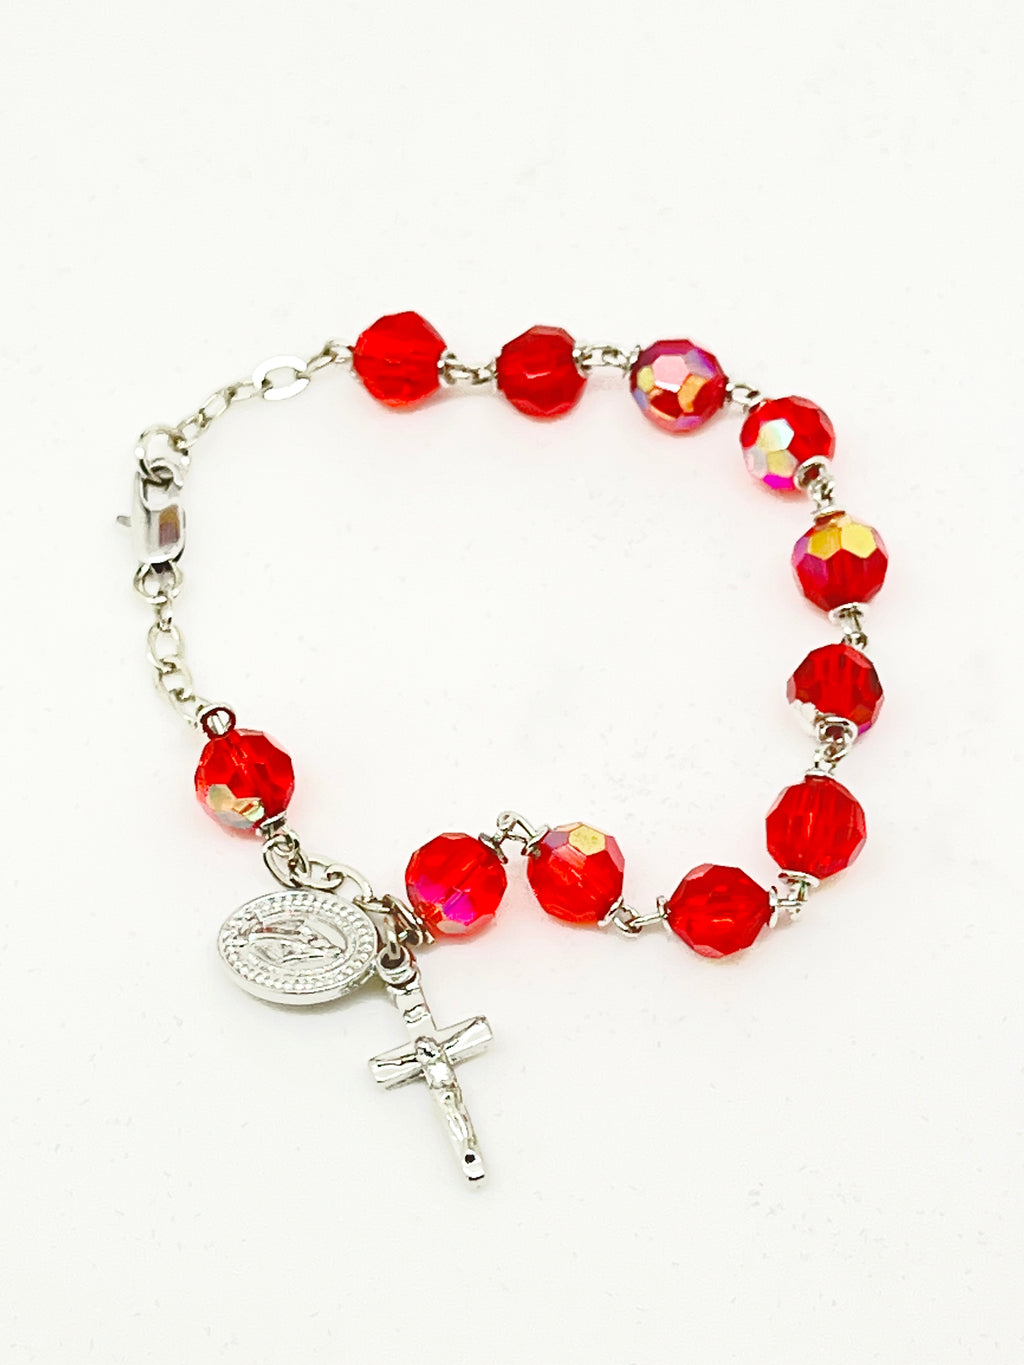 Ruby Red Crystal Rosary Bracelet 7MM - Unique Catholic Gifts